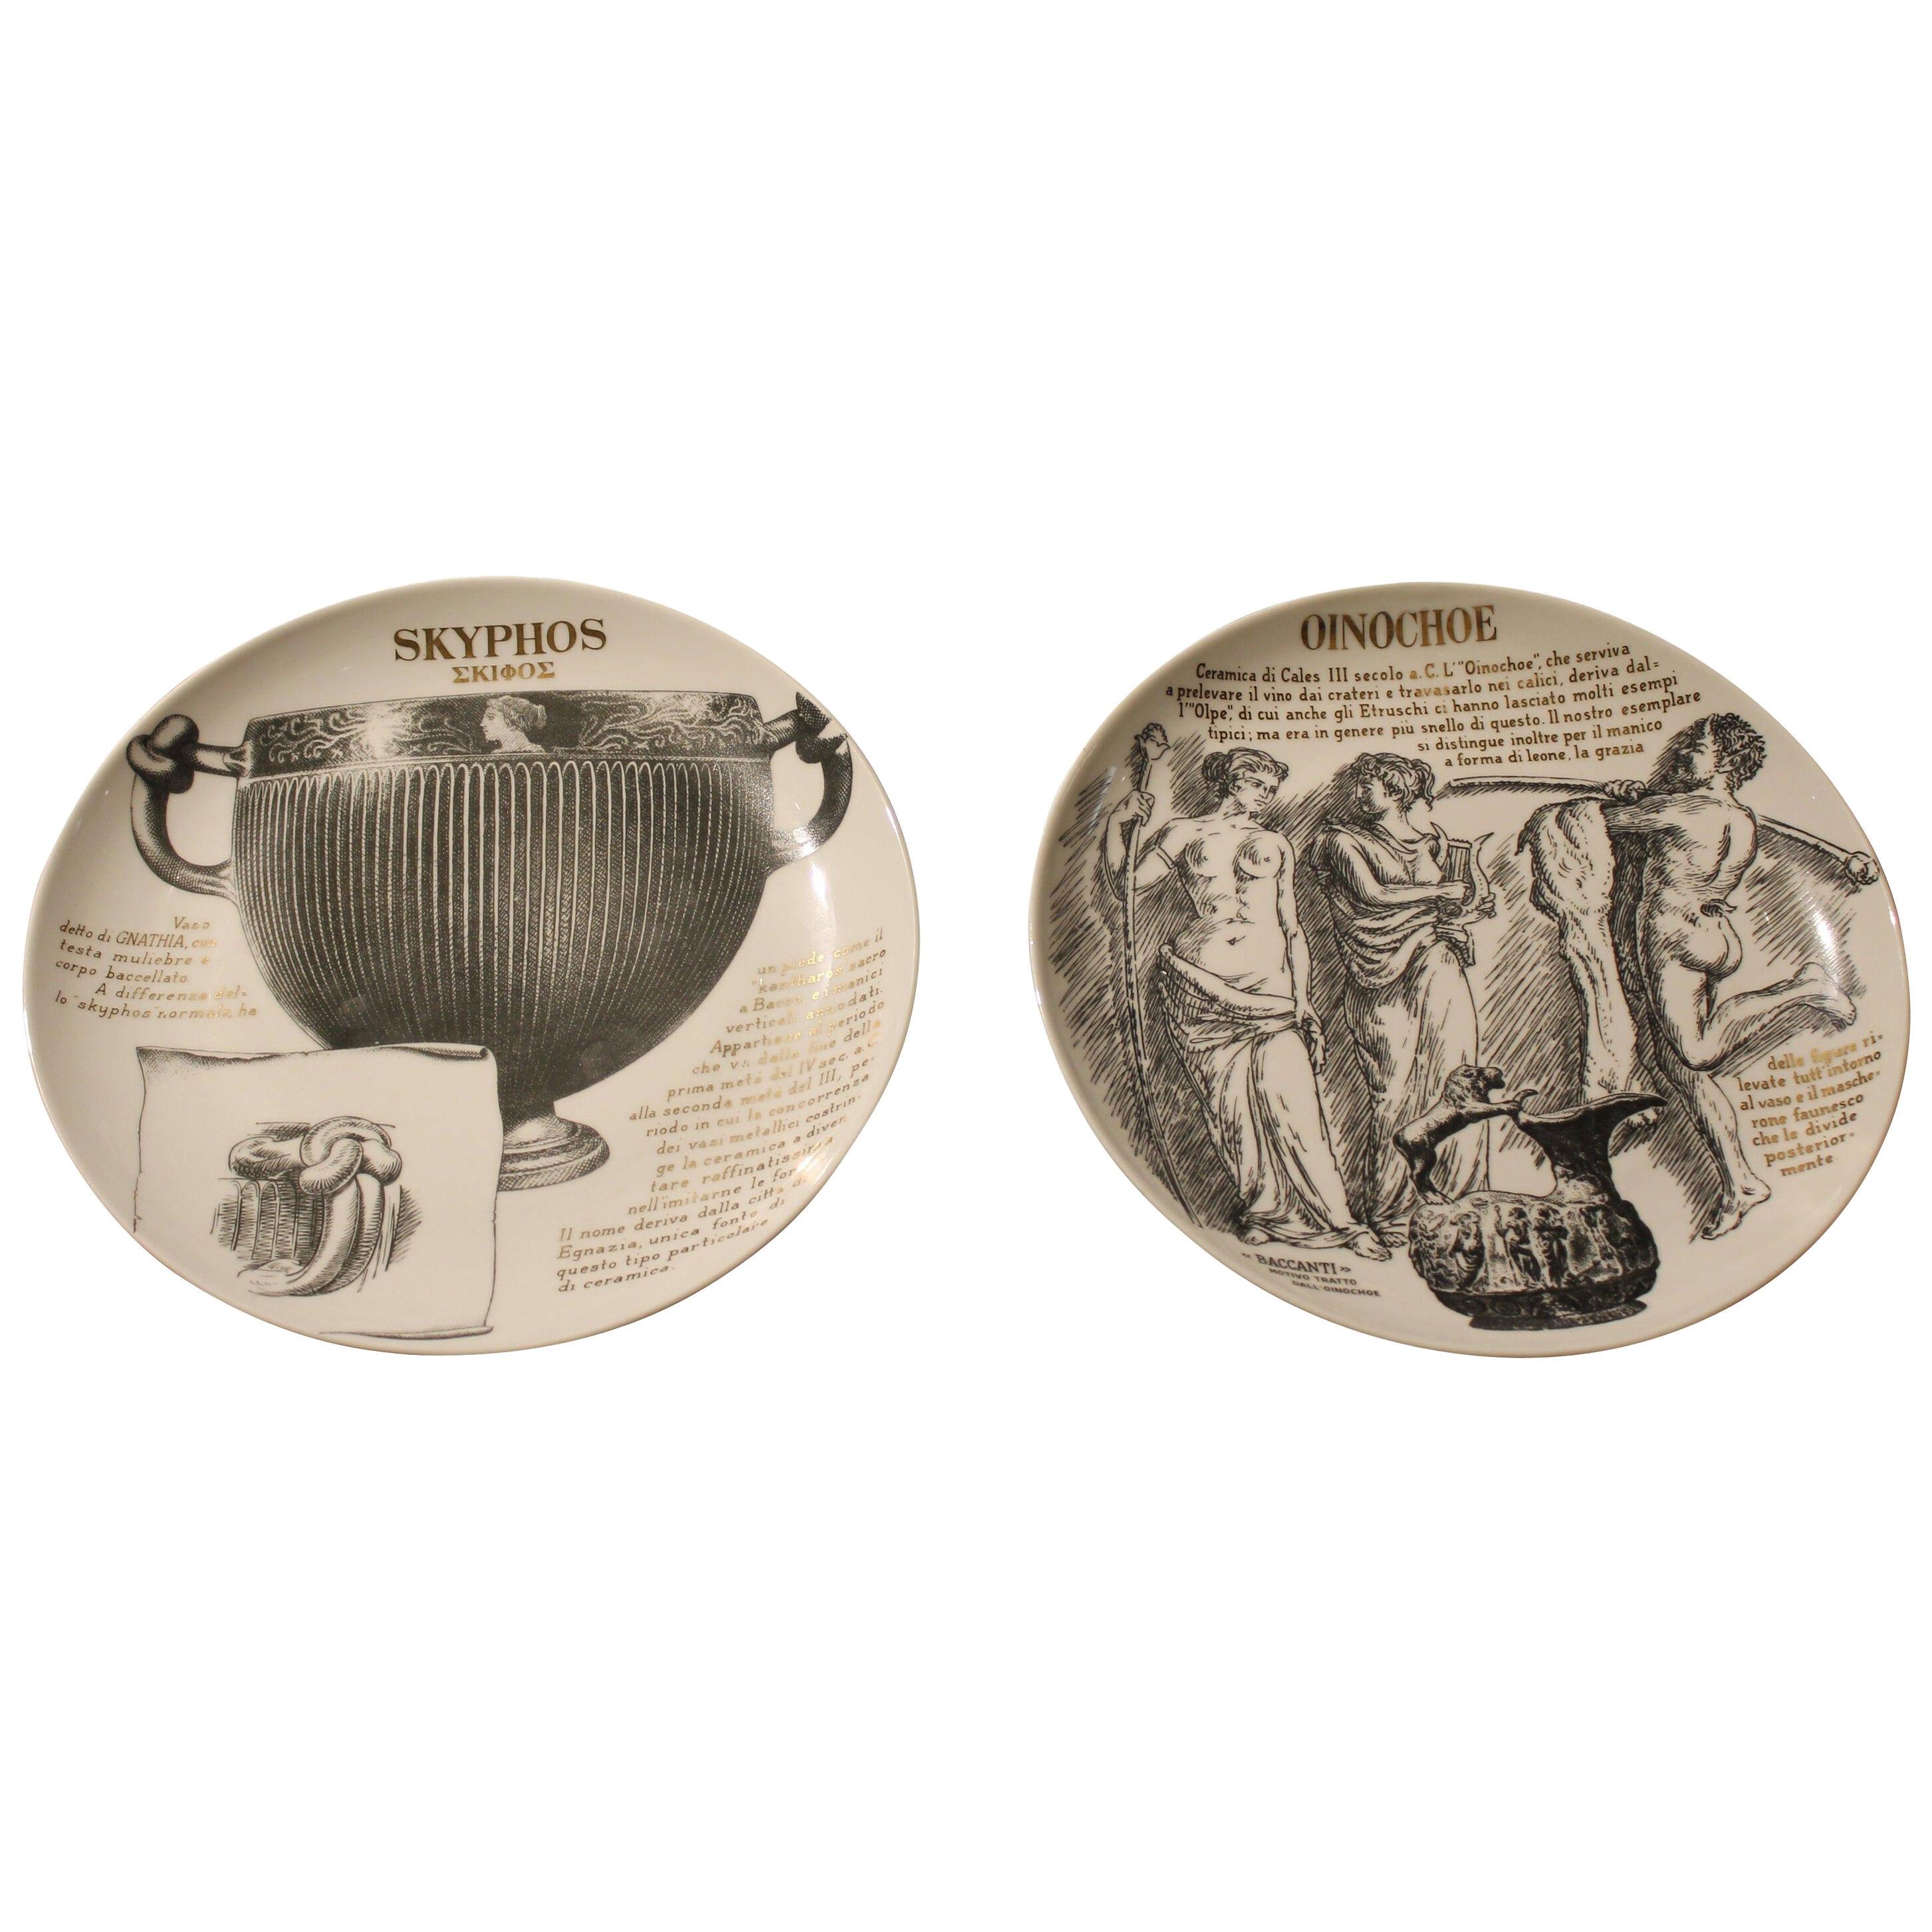 Fornasetti Limited Edition White Porcelain, Black and Gold Printed Plates 1970s